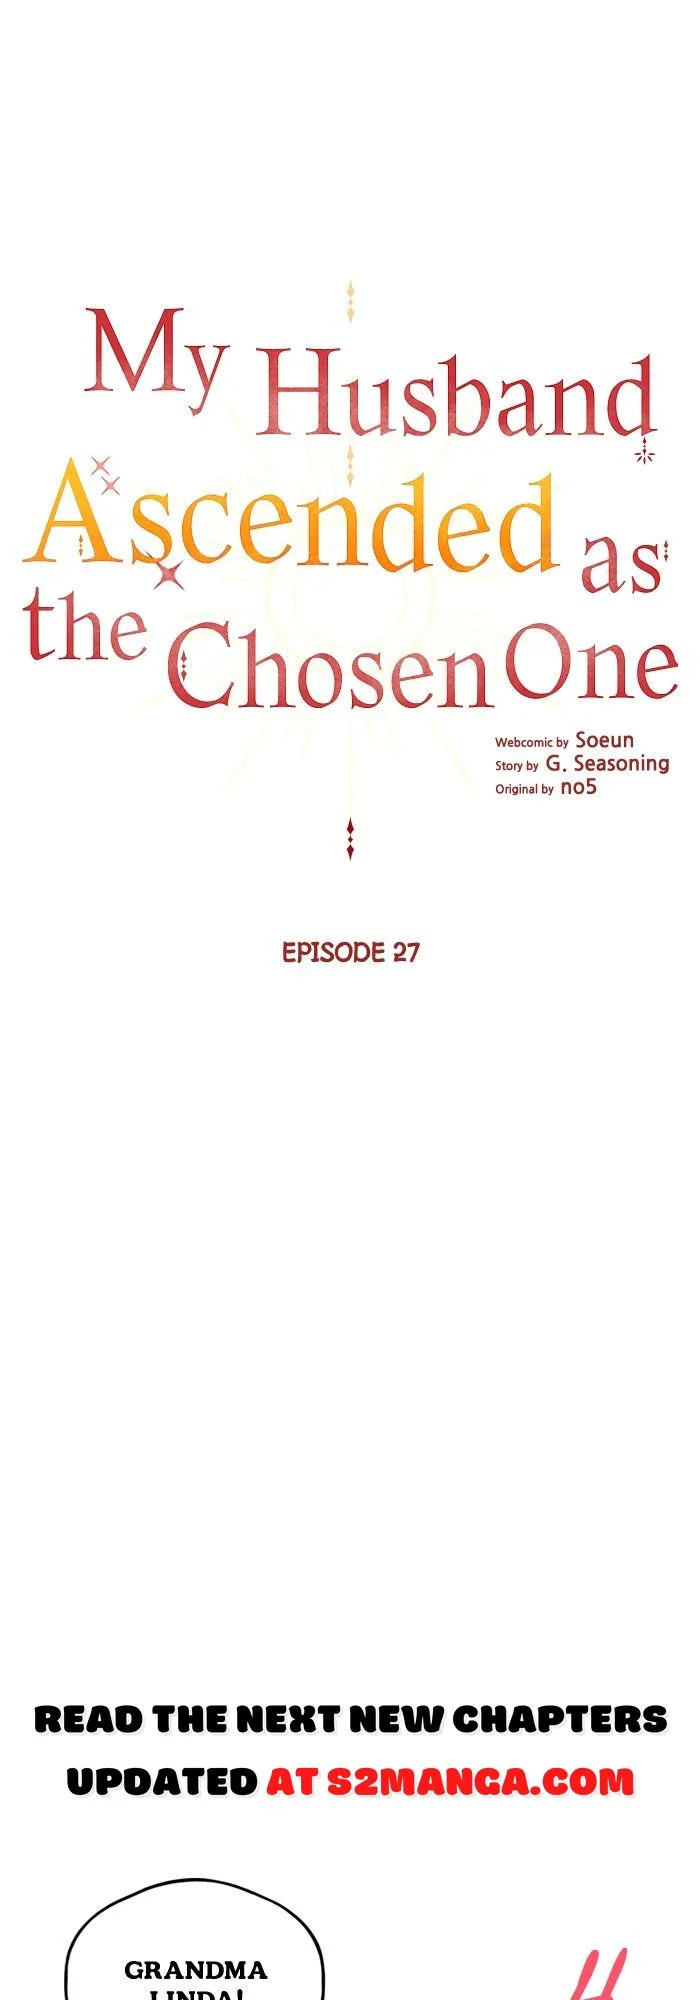 My Husband Ascended as the Chosen One chapter 27